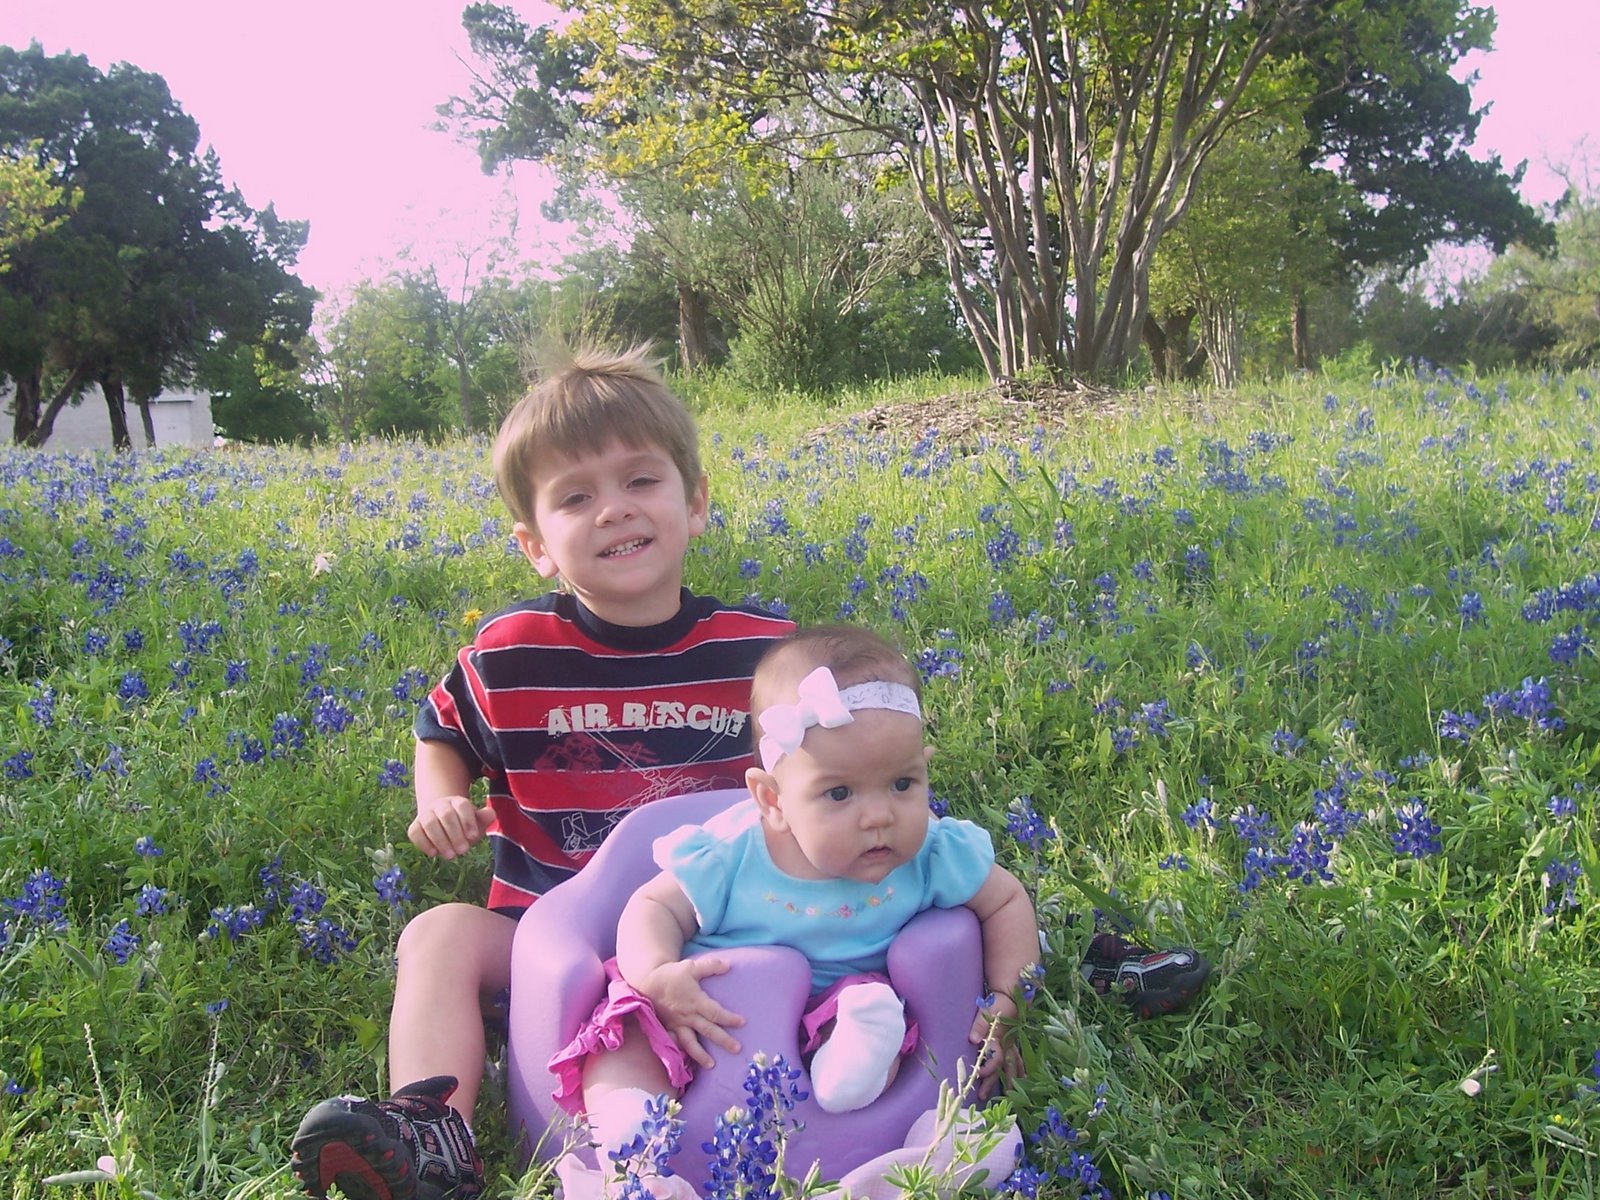 [2009+-+Easter+and+bluebonnets+April+105.jpg]